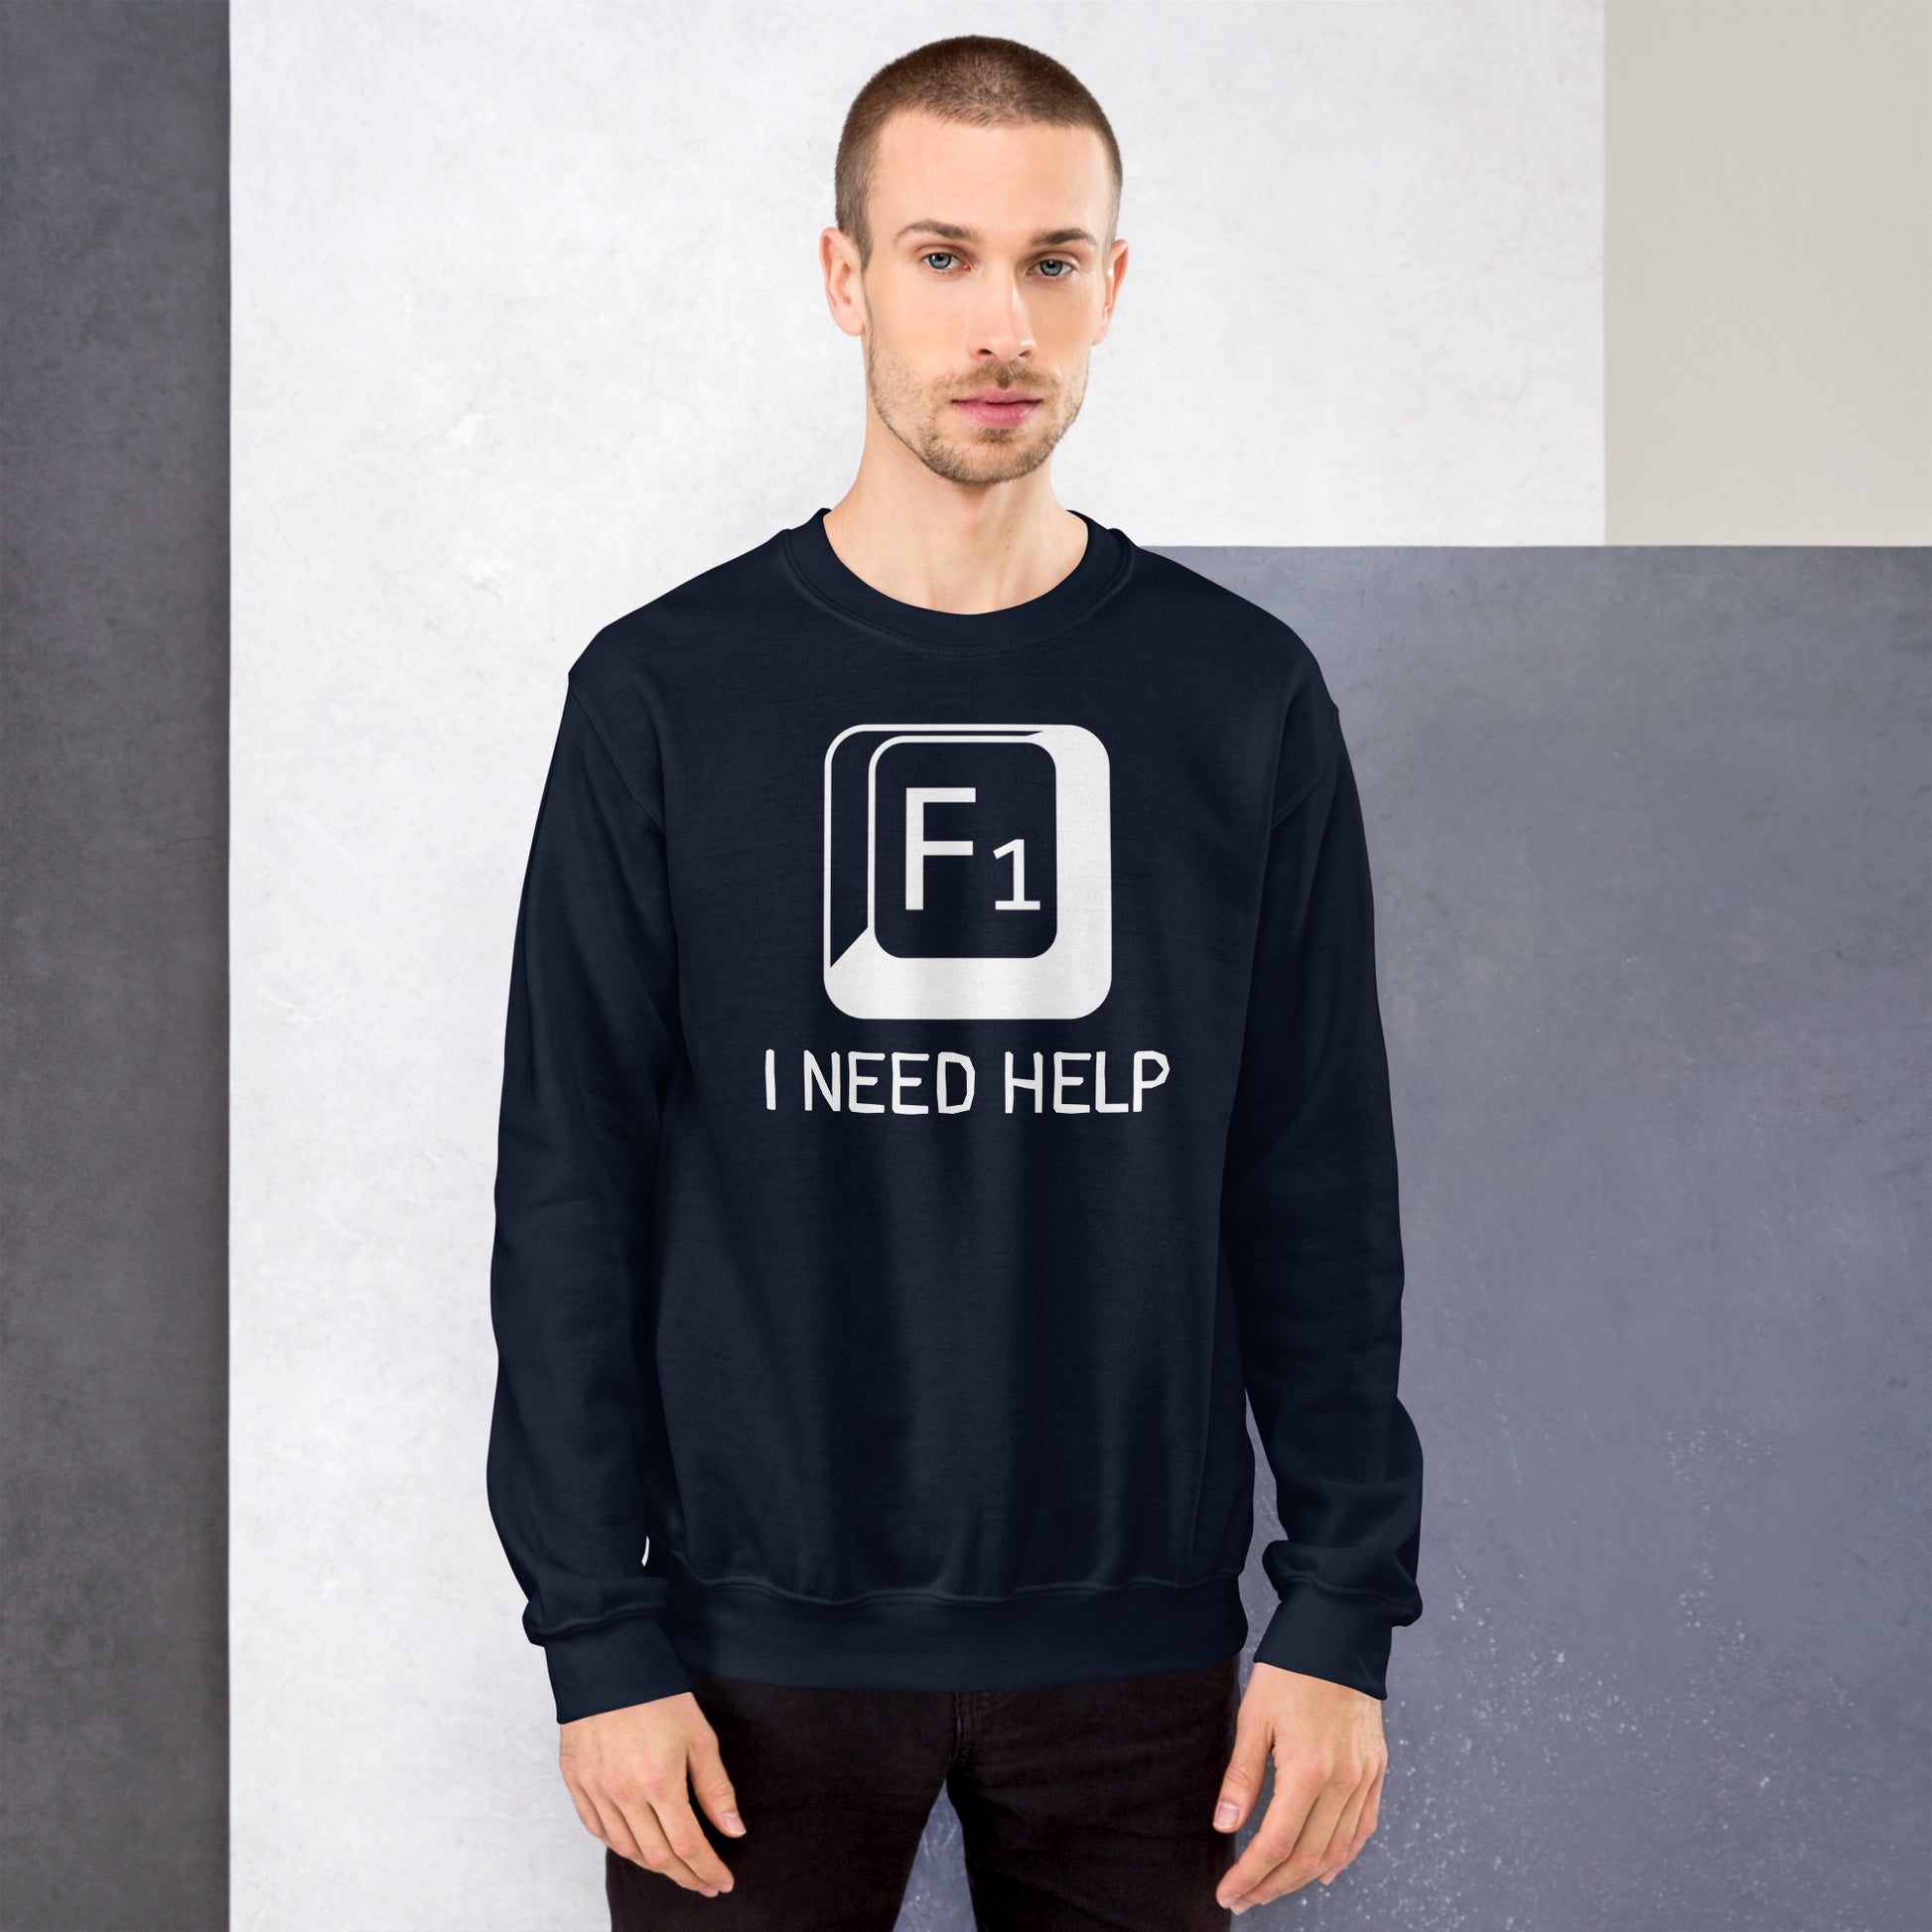 Men with navy sweatshirt and a picture of F1 key with text "I need help"